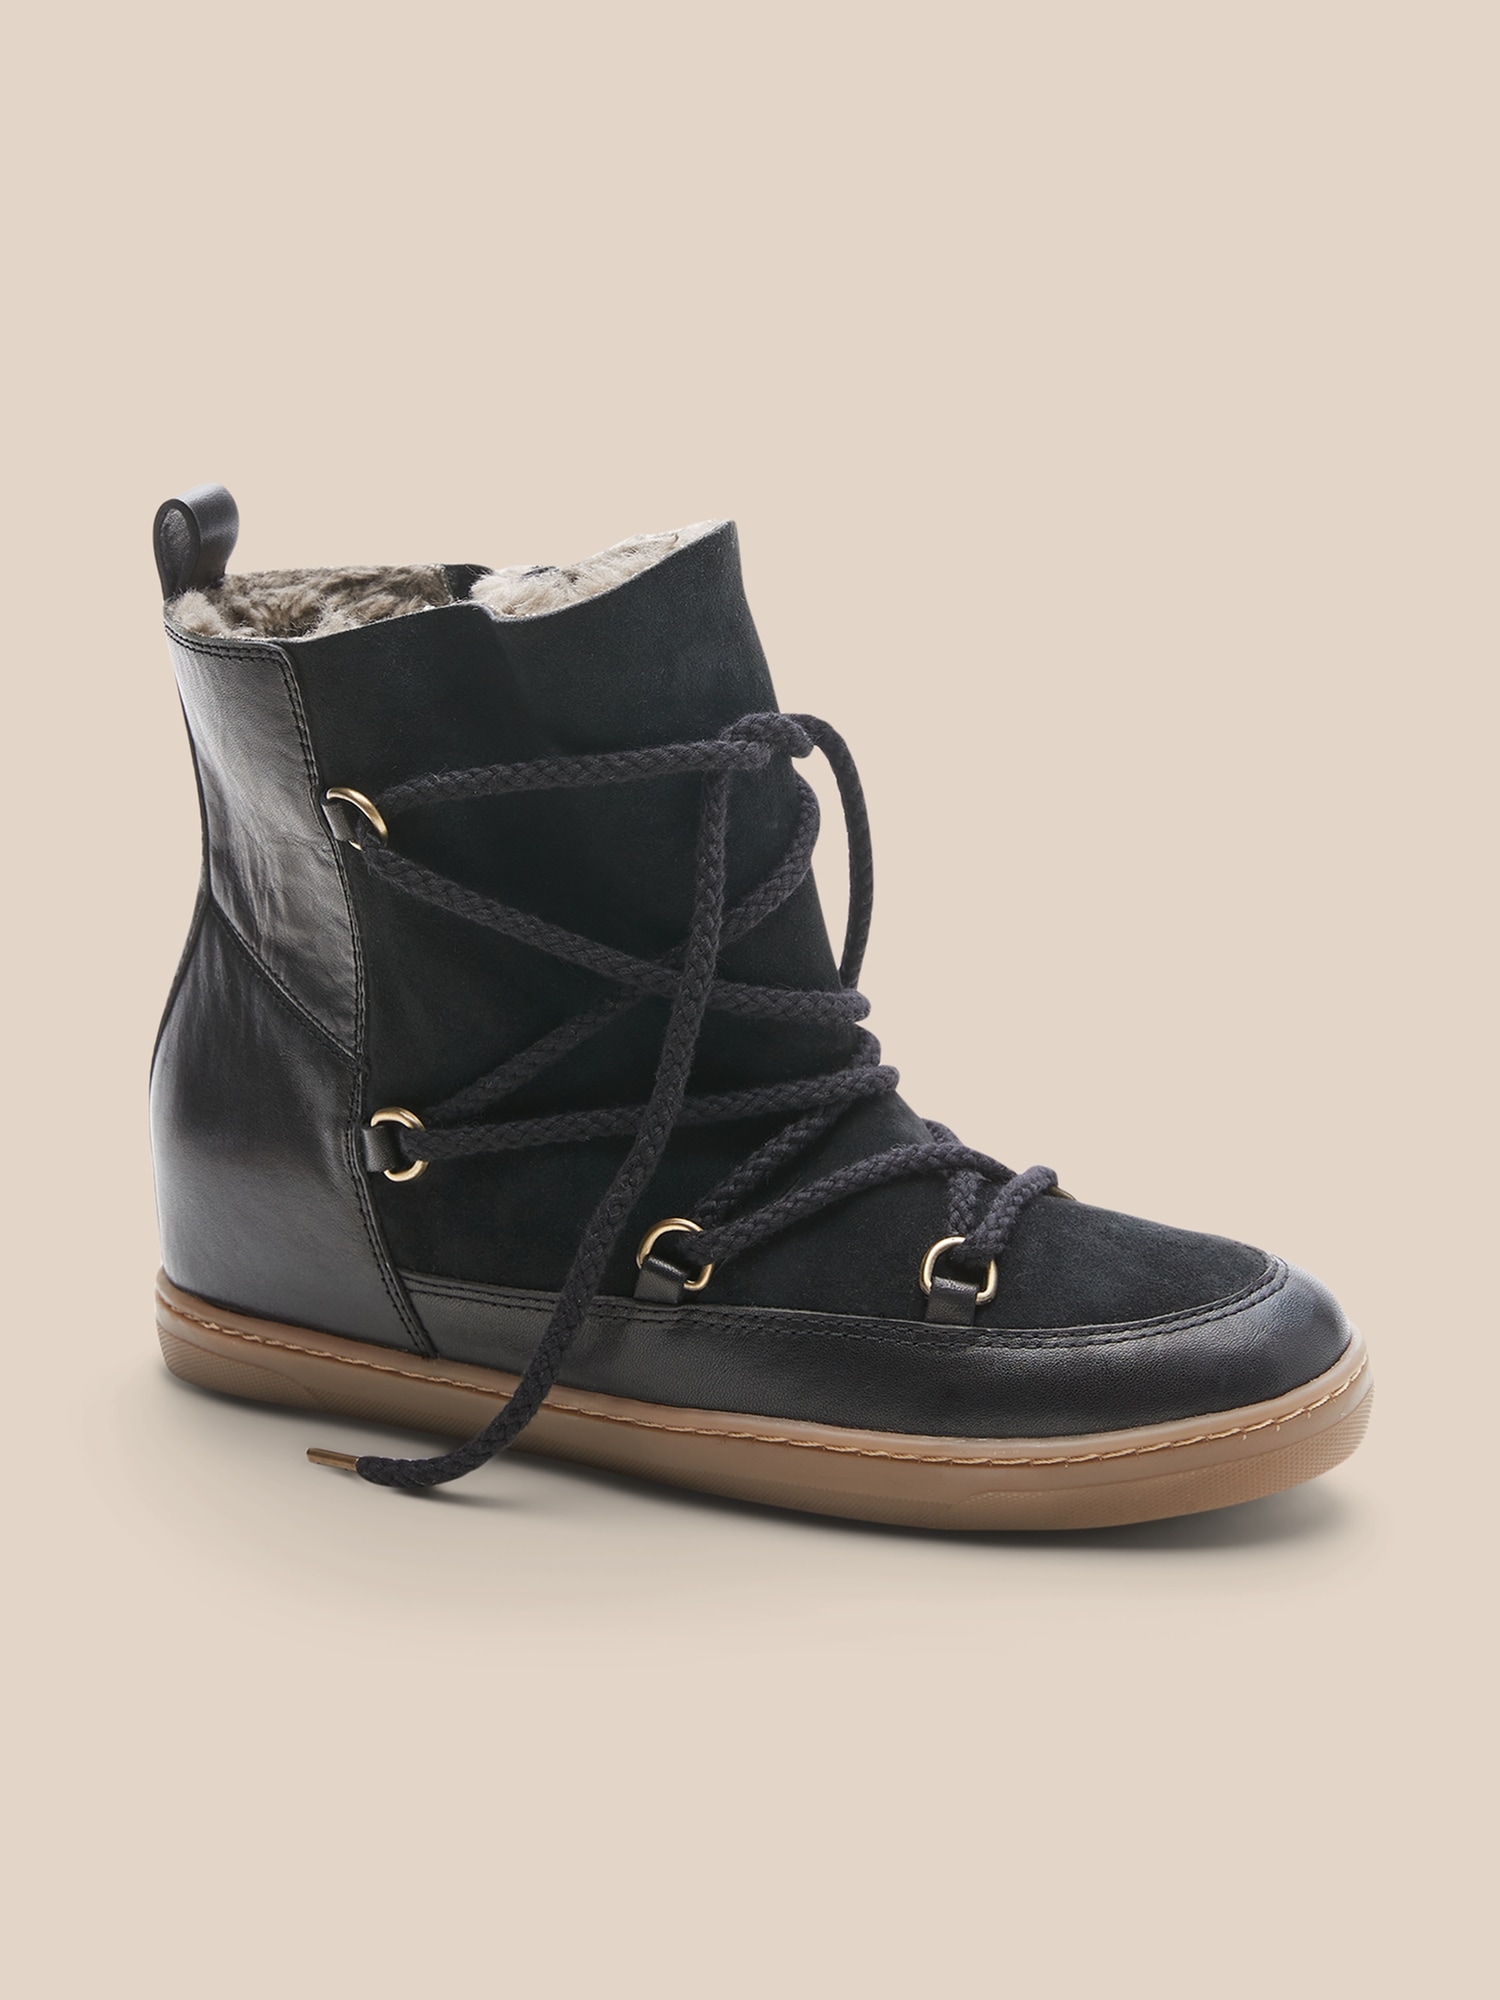 Leather & Suede Lace-Up Boot | Banana Republic